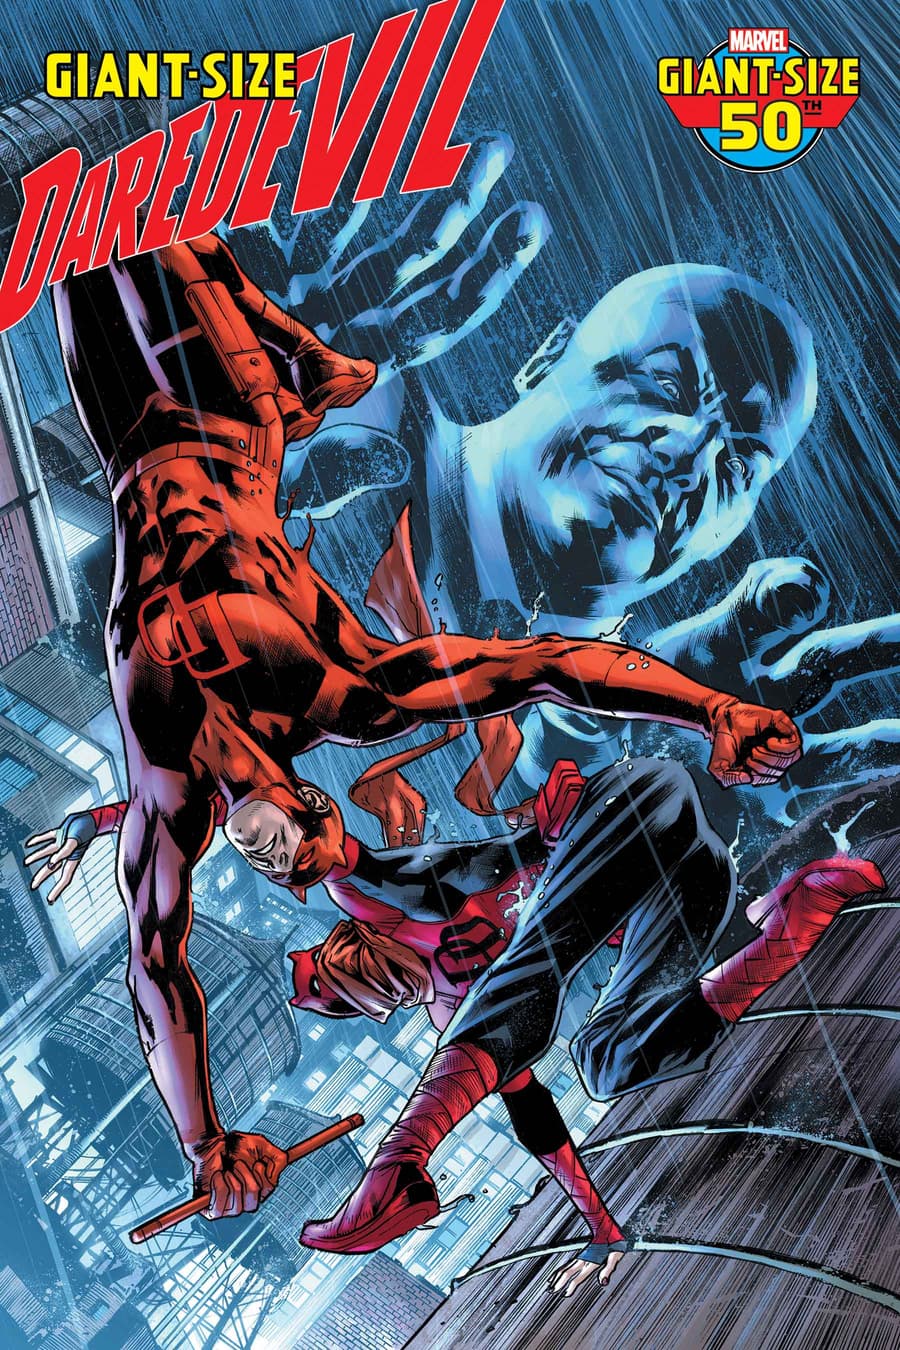 GIANT-SIZE DAREDEVIL #1 cover by Bryan Hitch